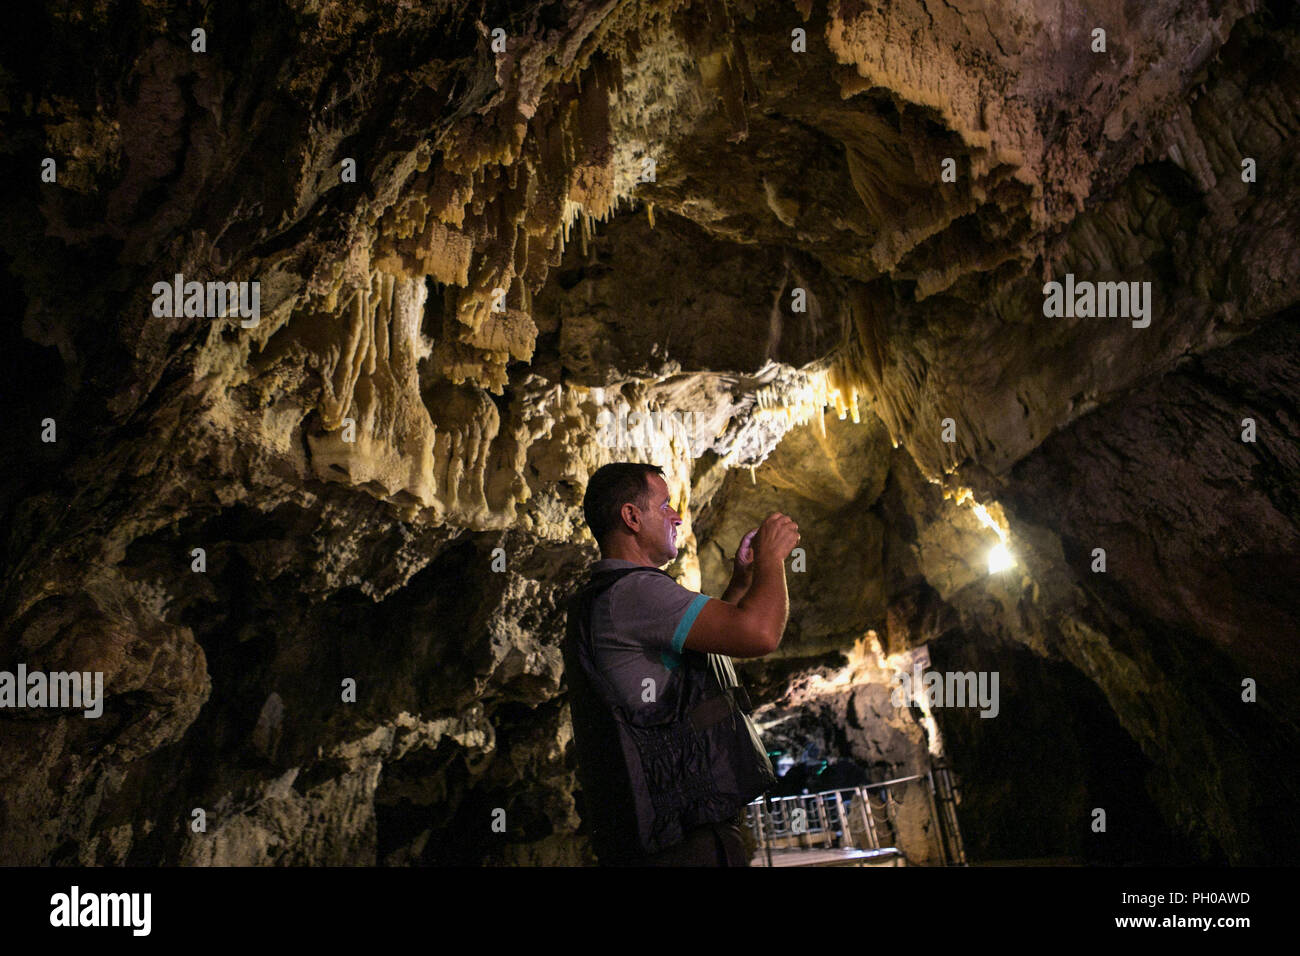 Hamedan, Iran. 27th Aug, 2018. A man takes pictures inside Alisadr cave in Hamedan province, western Iran, on Aug. 27, 2018. Alisadr Cave attracts thousands of tourists every year. Credit: Ahmad Halabisaz/Xinhua/Alamy Live News Stock Photo